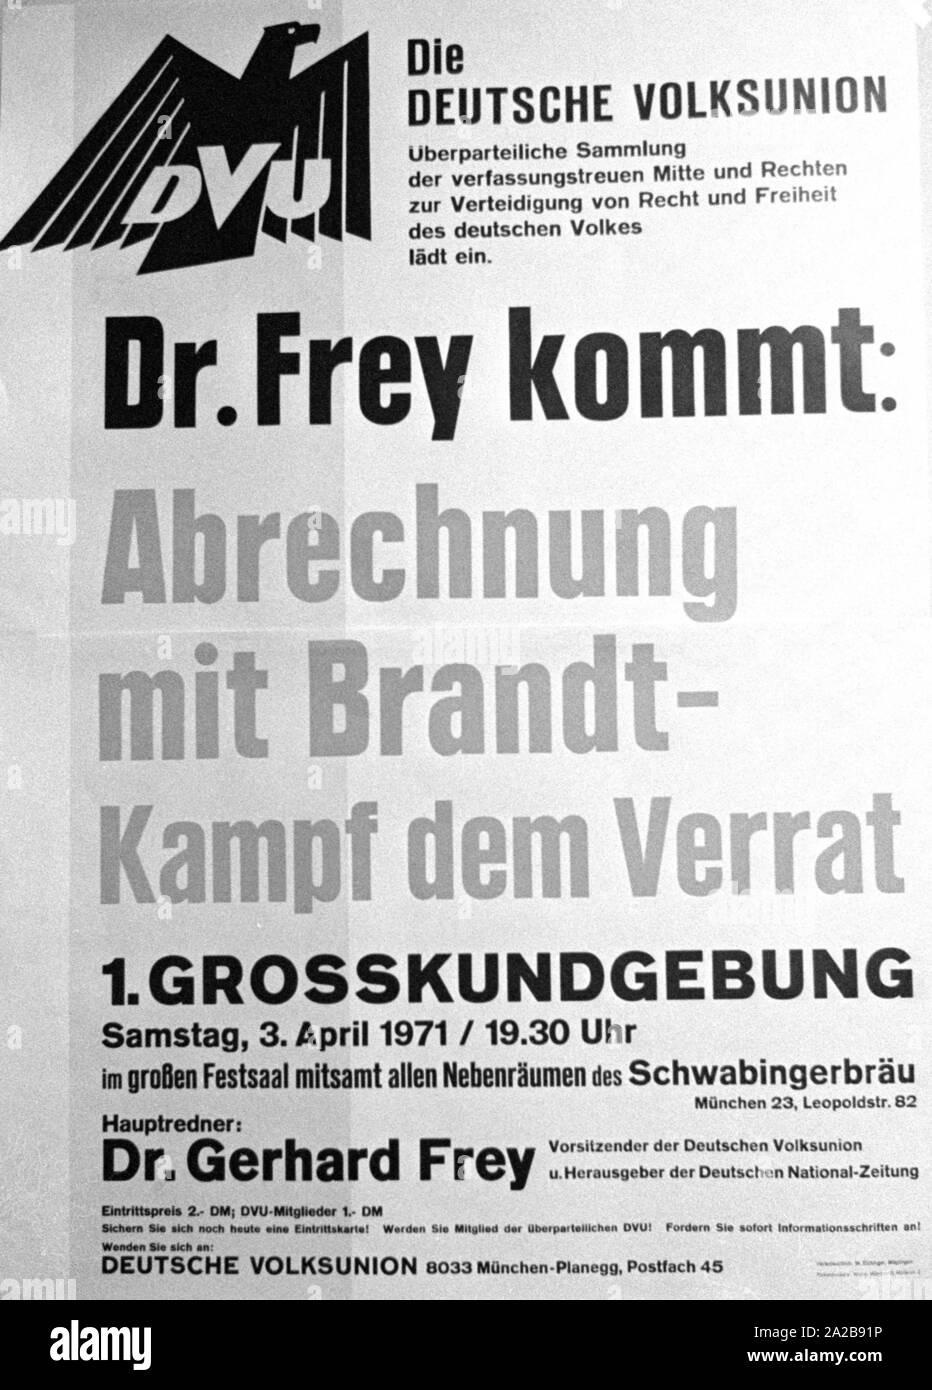 On 03.04.1971 the neo-Nazi party 'German People's Union' (today NPD) organized its first mass rally in Schwabinger Braeu in Munich, under the direction of the publisher Gerhard Frey.  There was a protest rally with leading politicians, a counter-demonstration and blockade of the building. In the picture: Poster for the event. Stock Photo